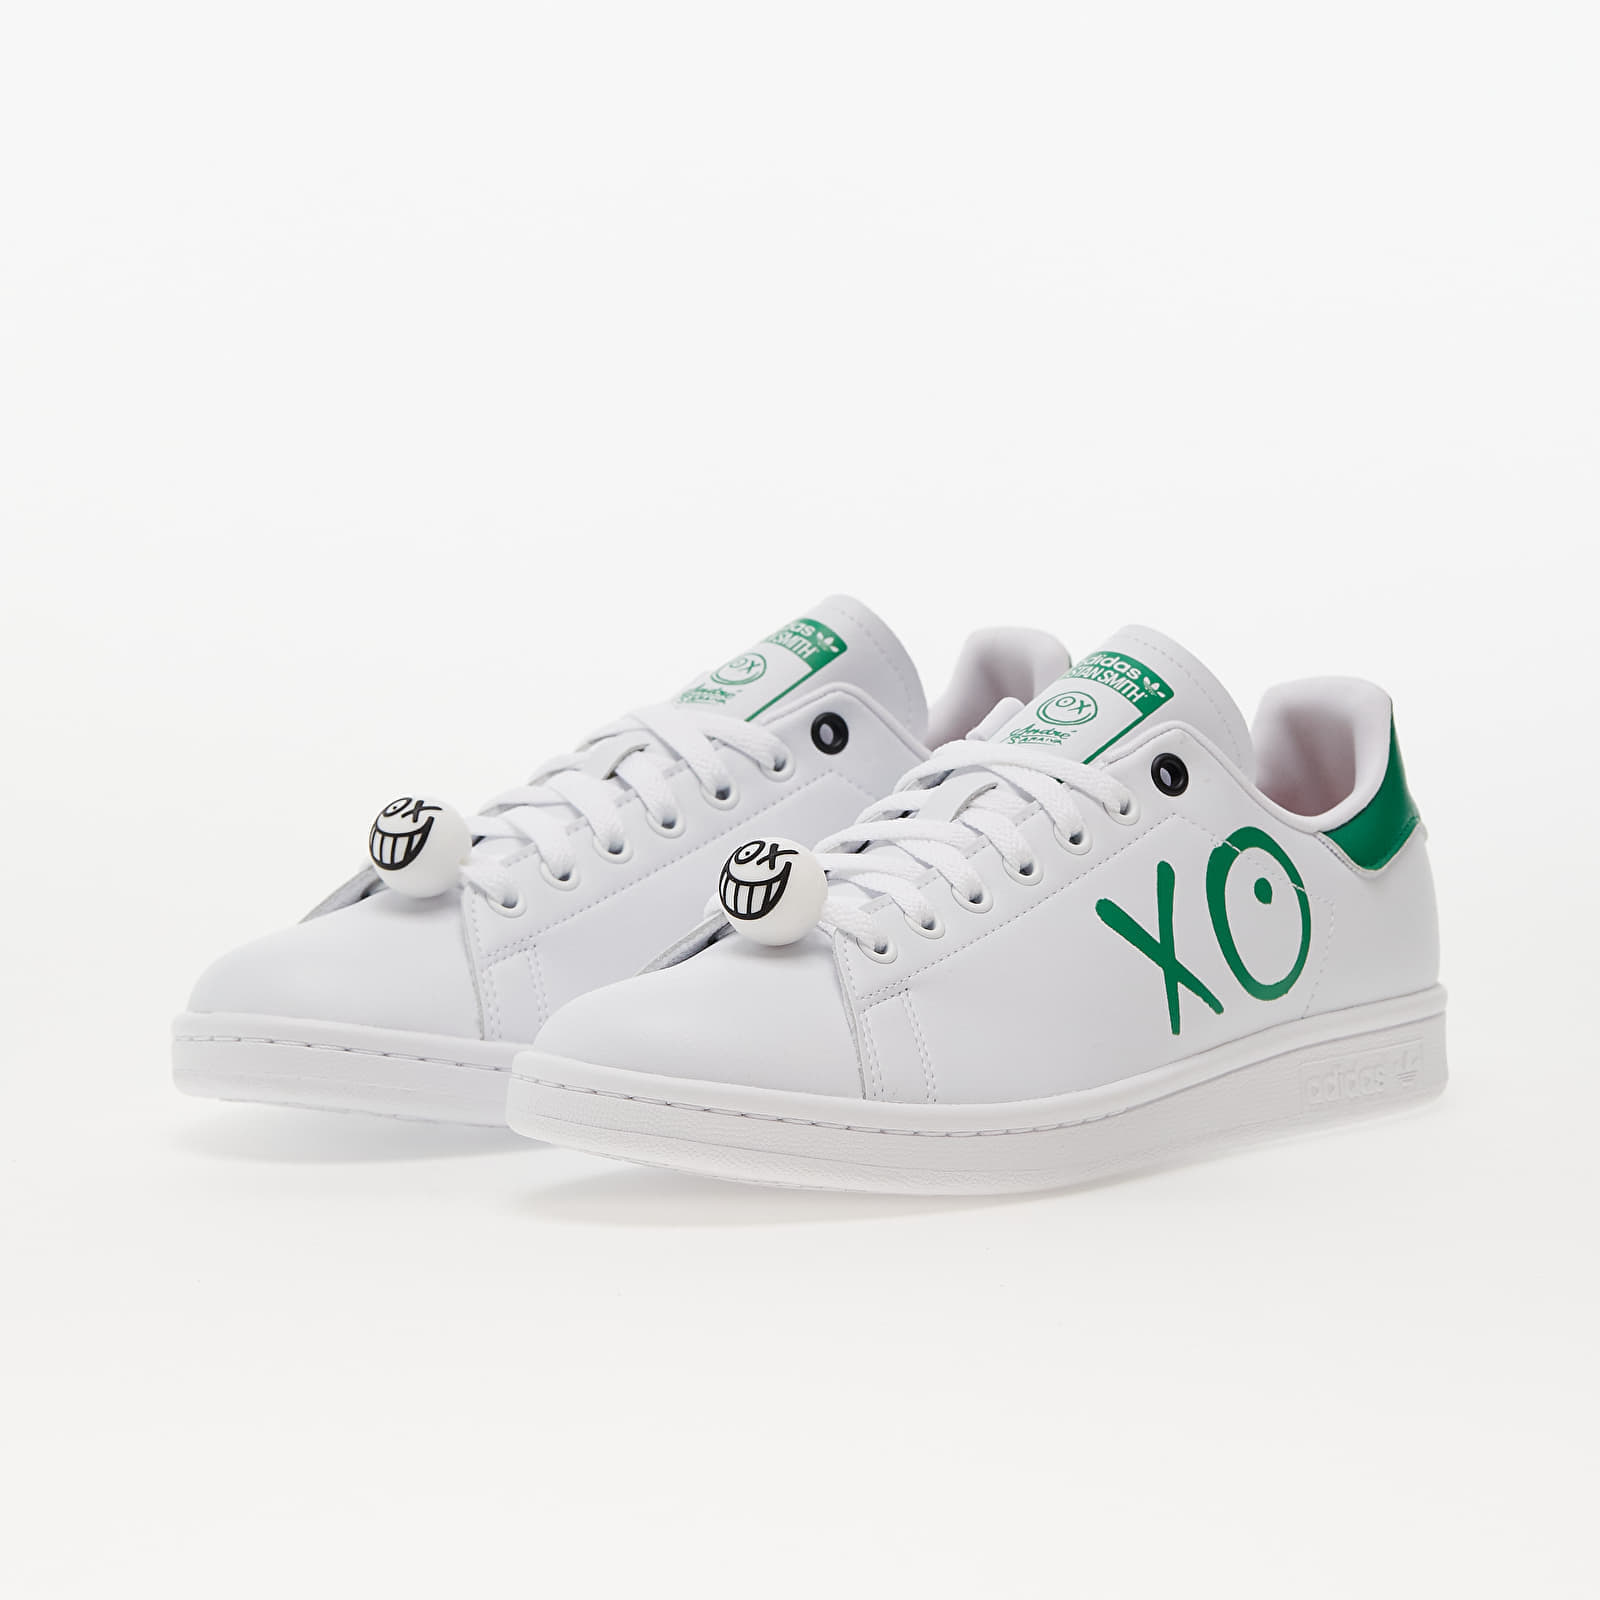 Men's sneakers and shoes adidas Originals Stan Smith Ftw White/ Ftw White/ Core Black